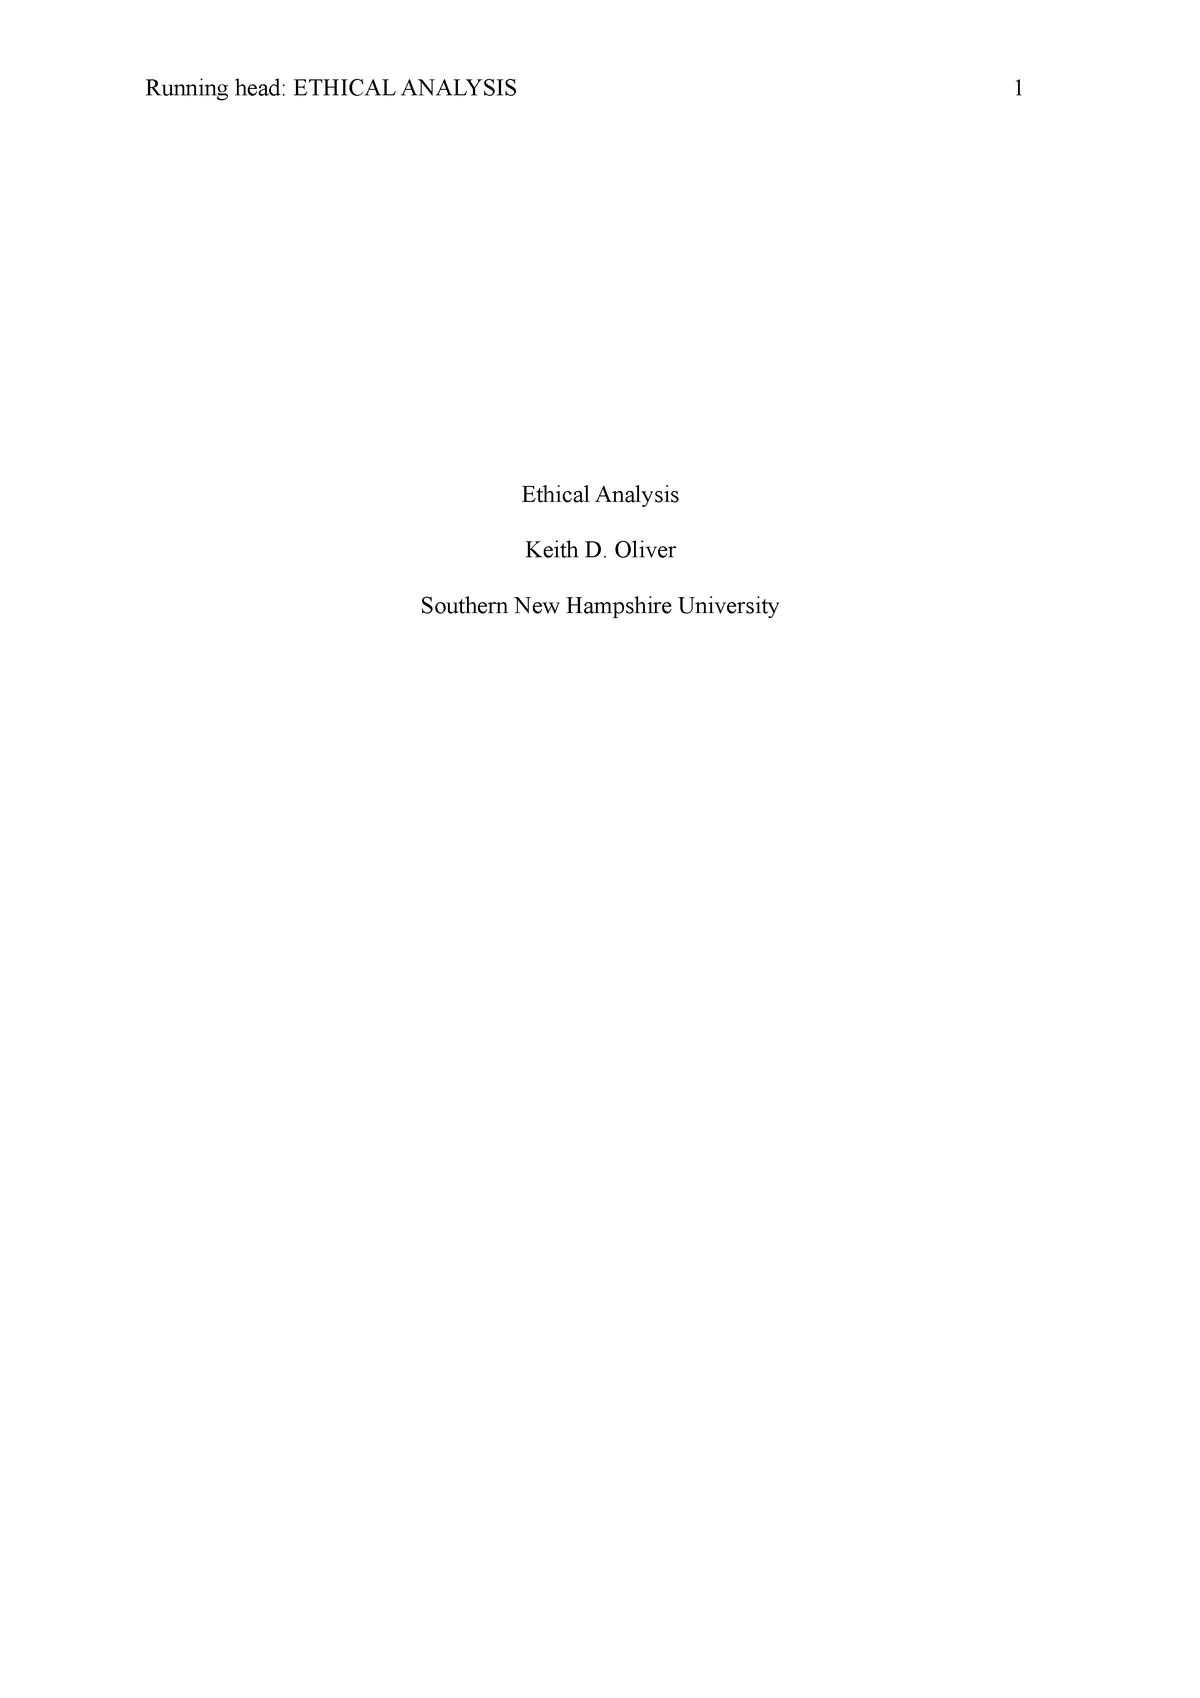 JUS 455 Final Project - Running head: ETHICAL ANALYSIS 1 Ethical ...